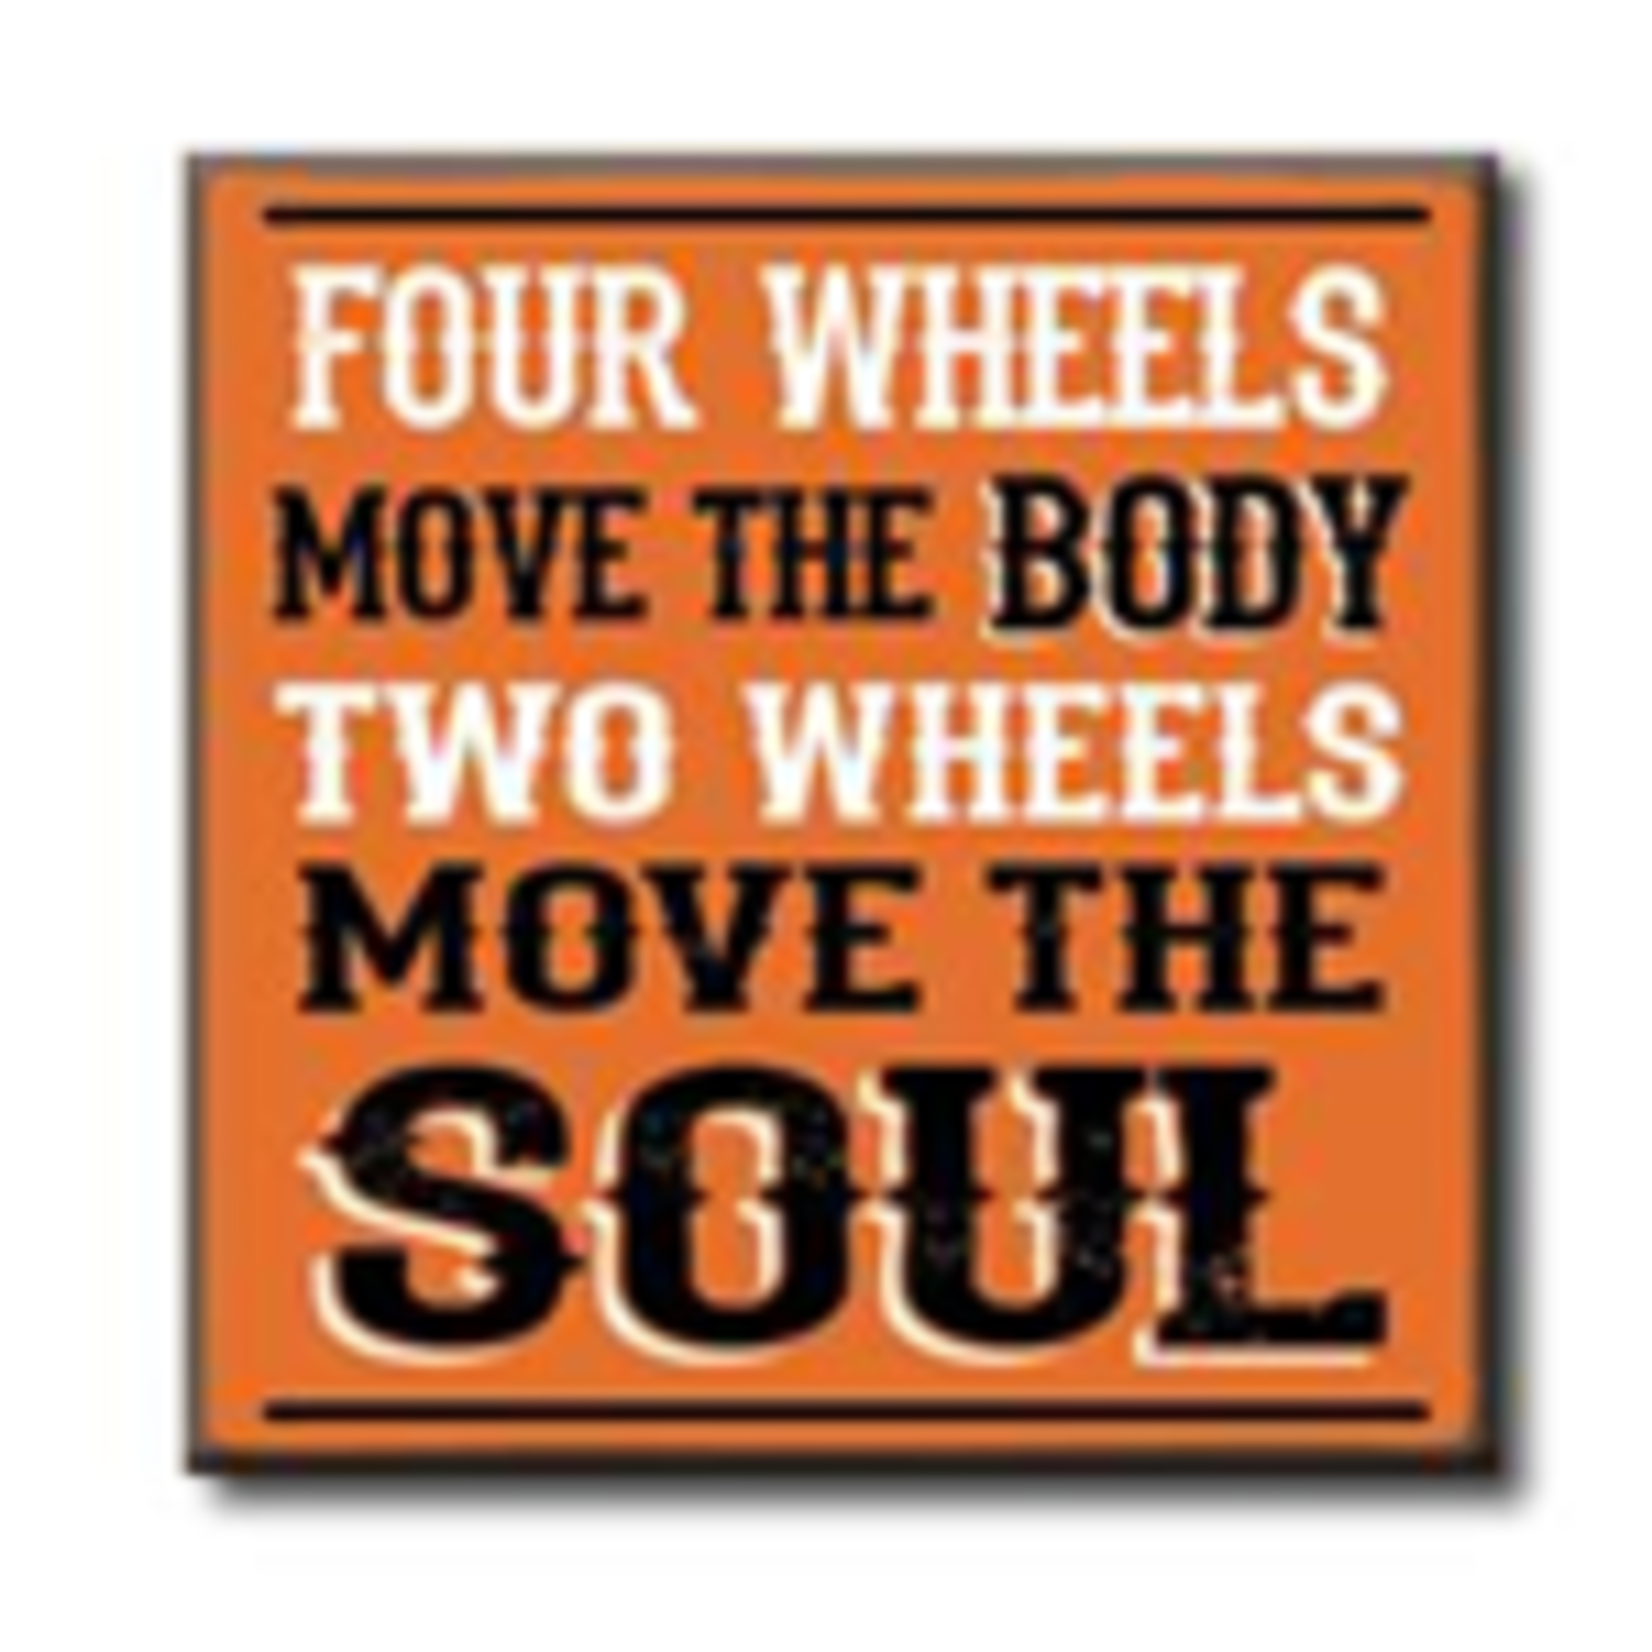 Four Wheels Move the Body 4x4